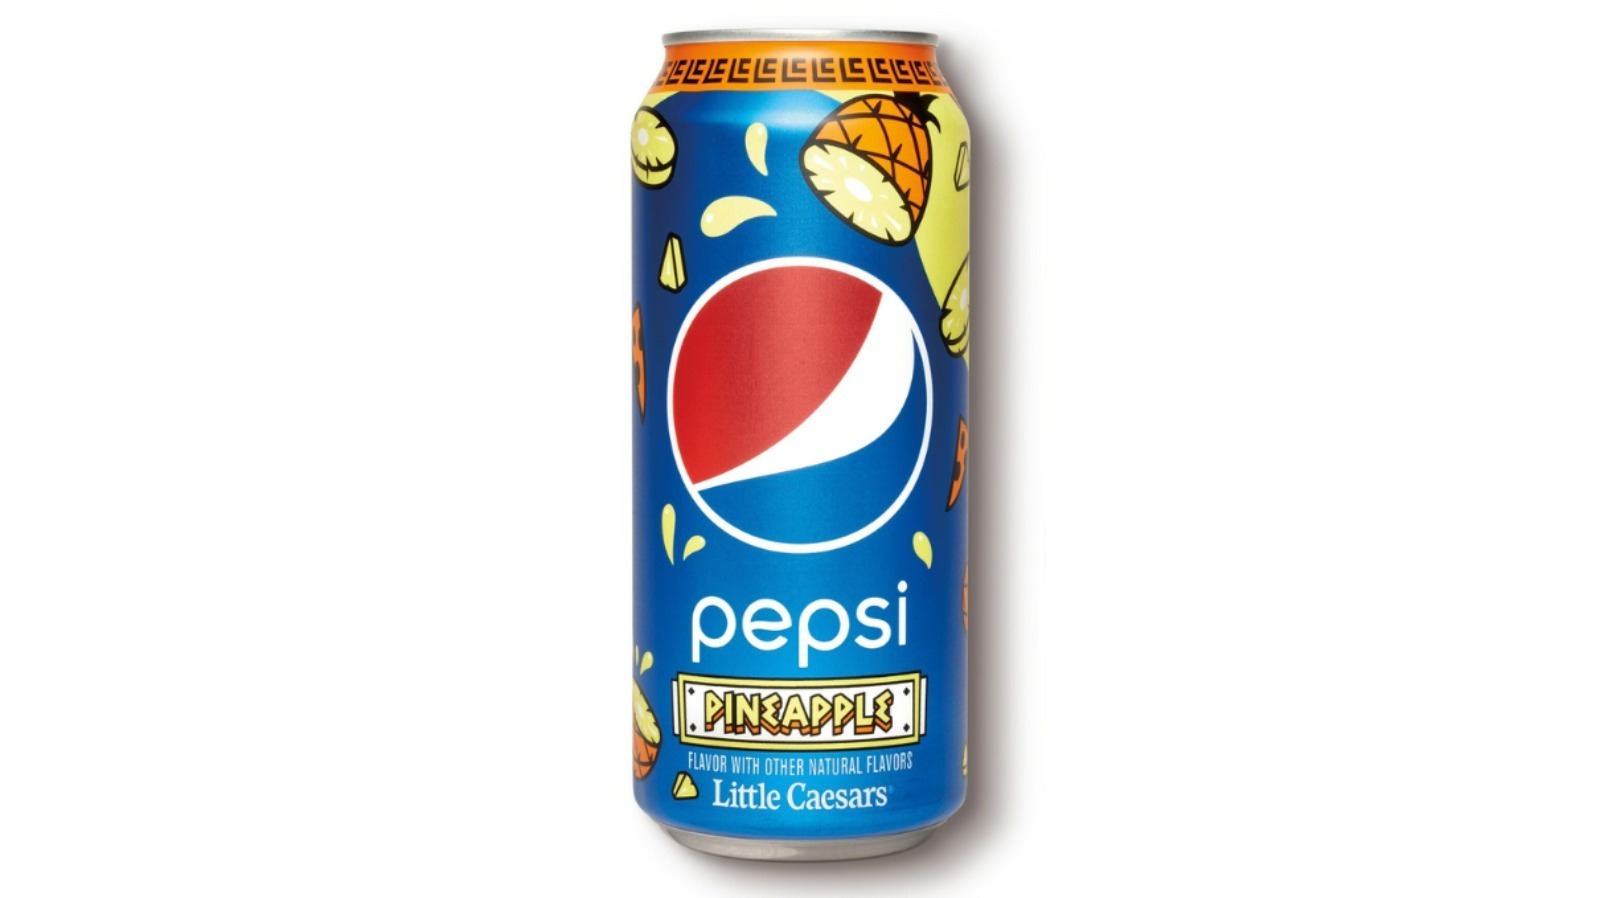 Pepsi Has Teamed Up With Little Caesars For A Limited-Time Pineapple Soda – The Daily Meal